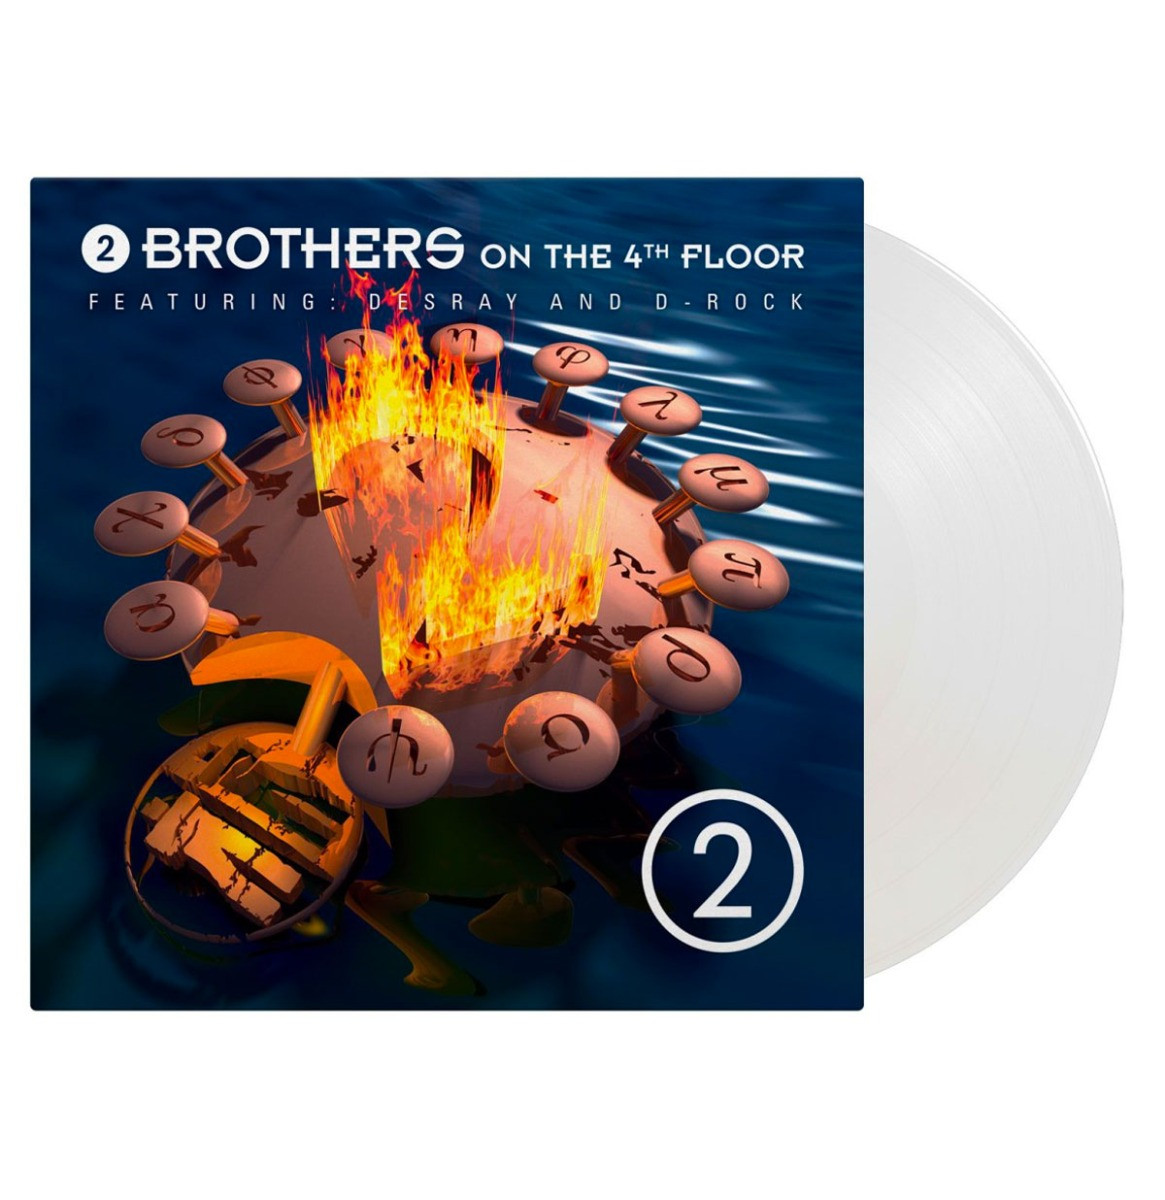 2 Brothers On The 4th Floor - 2 (Clear Vinyl) 2LP